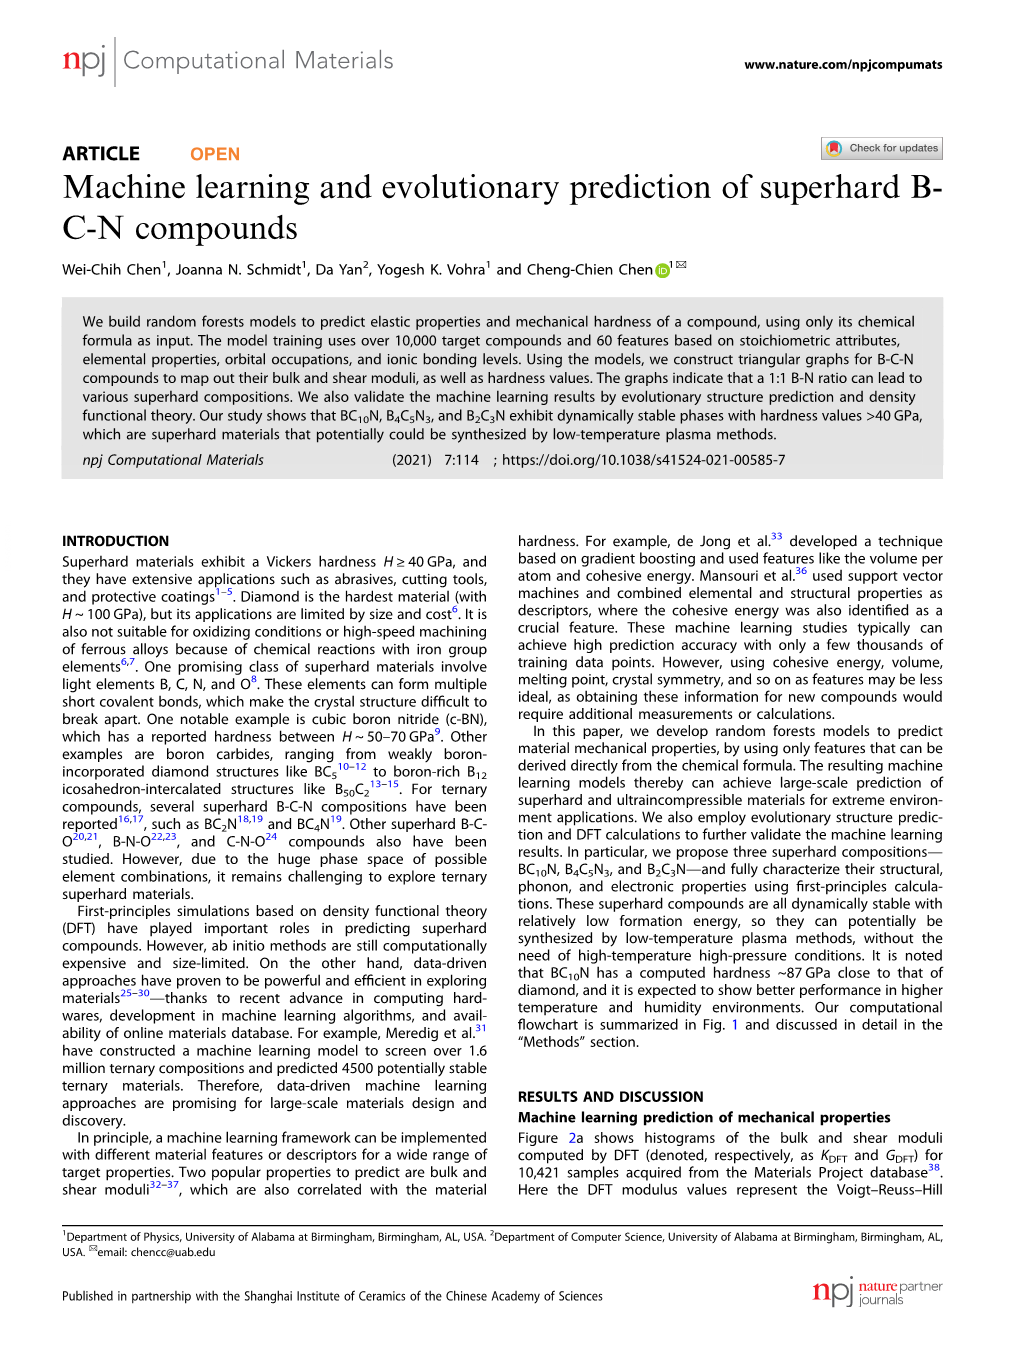 Machine Learning and Evolutionary Prediction of Superhard B-C-N